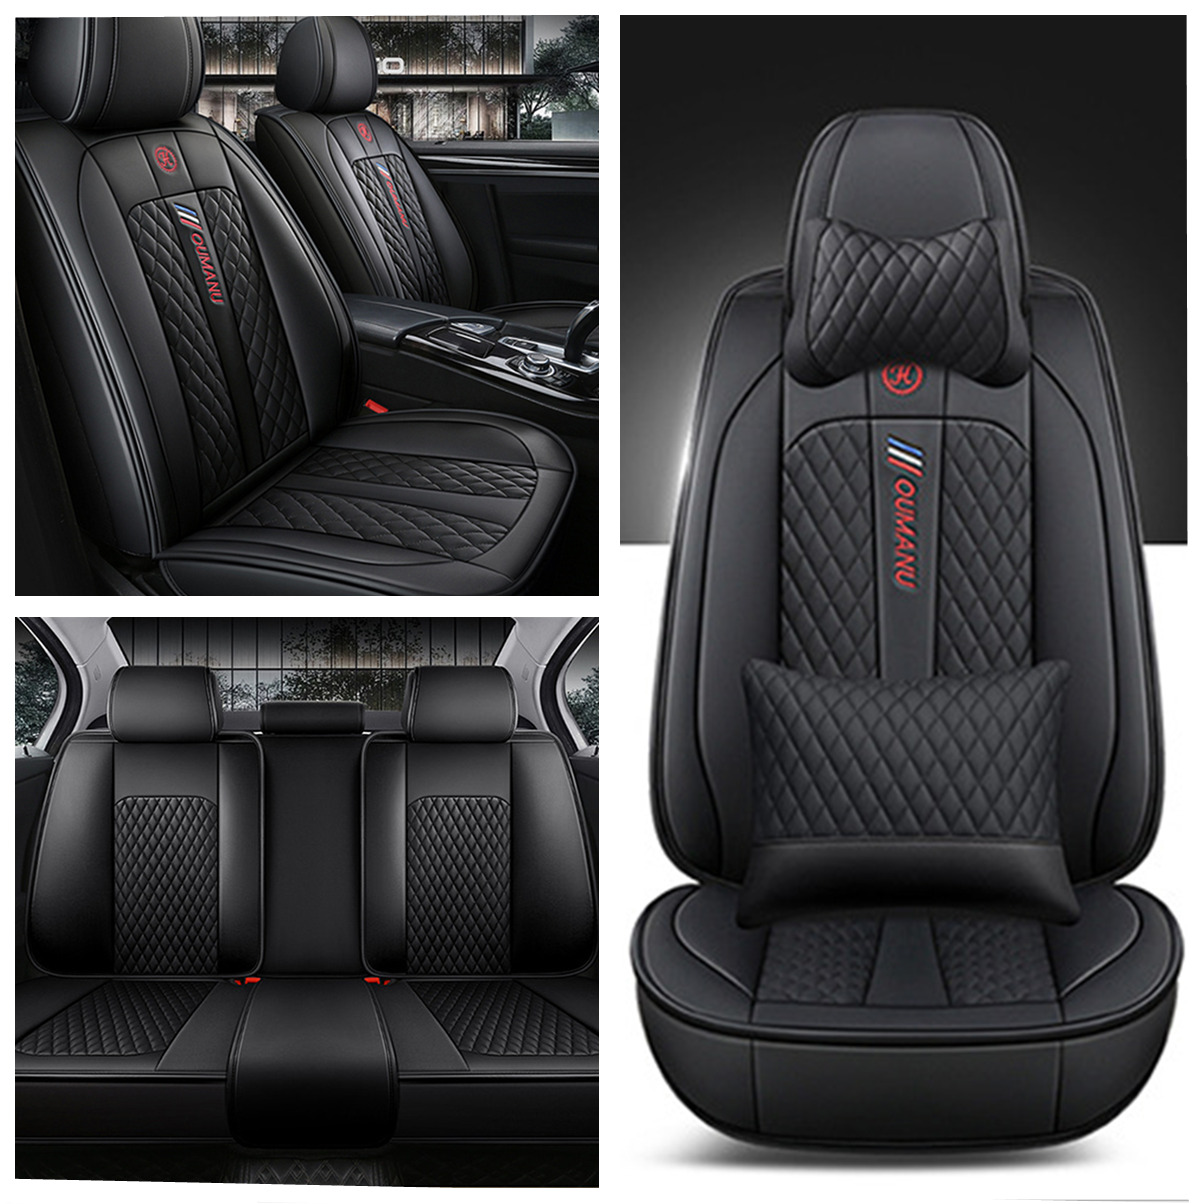 Deluxe Edition PU Leather Full Set Car Seat Covers Cushion Chair